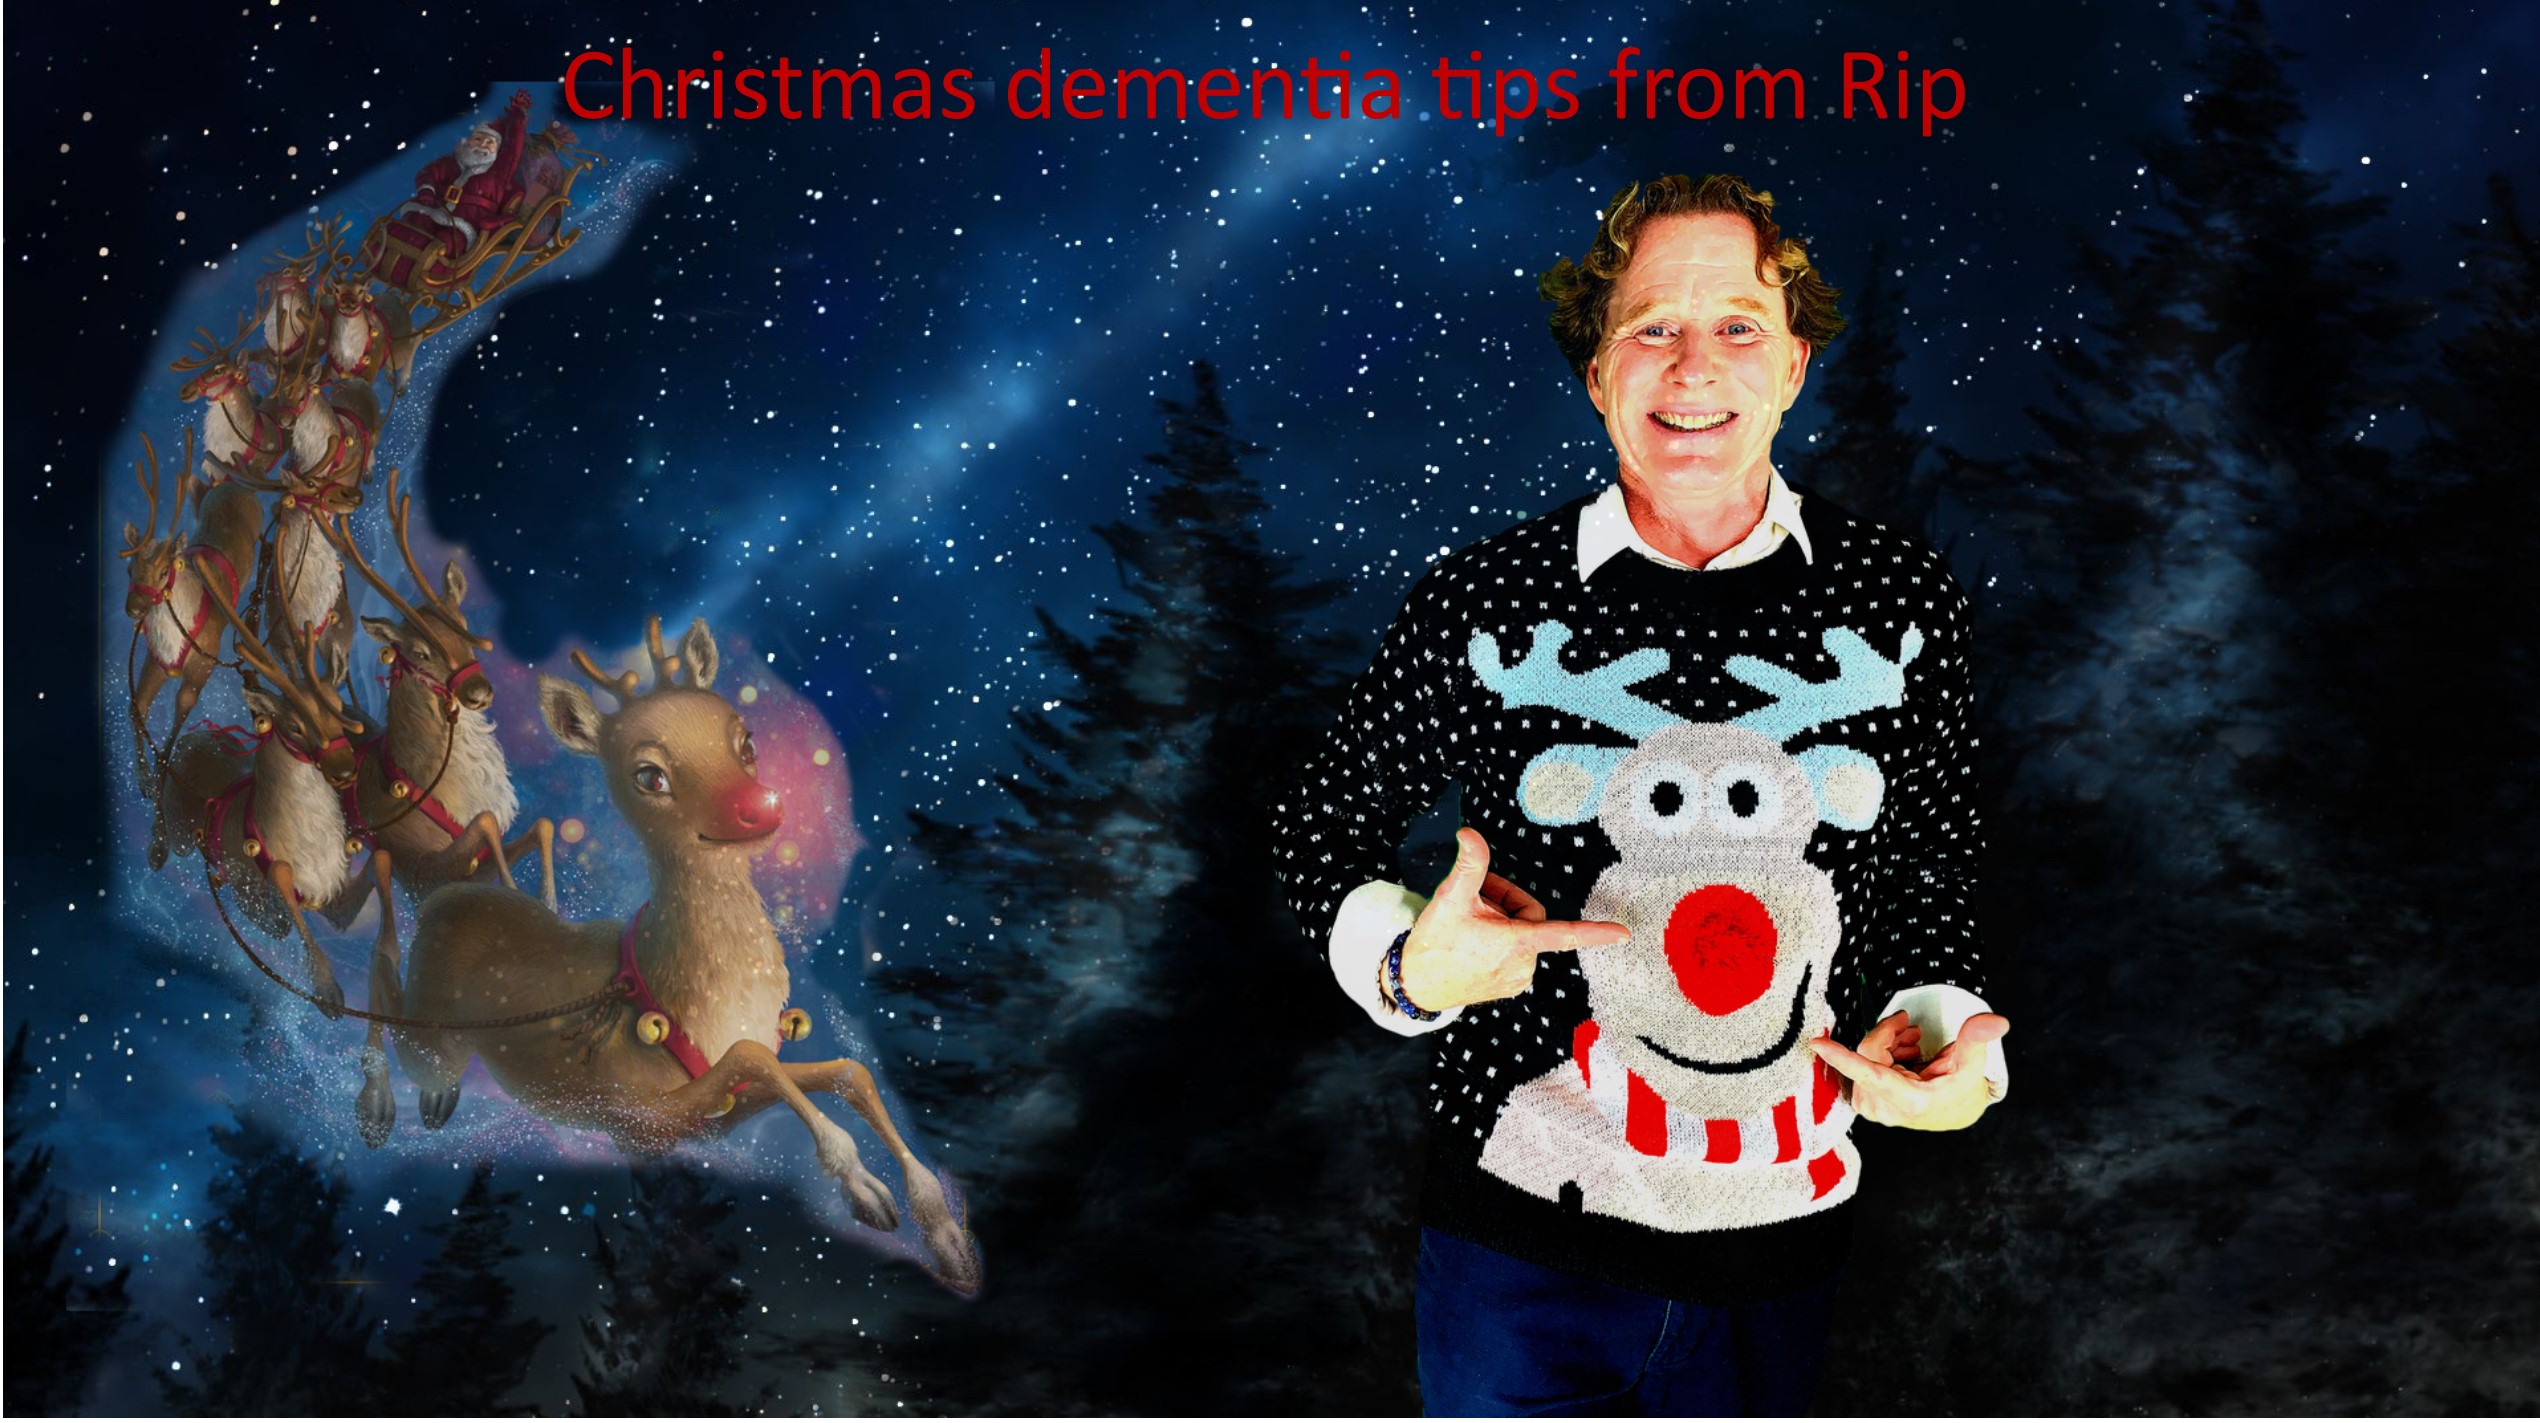 A musical Sleigh ride with Rudolph the red nose dementia reindeer featured image